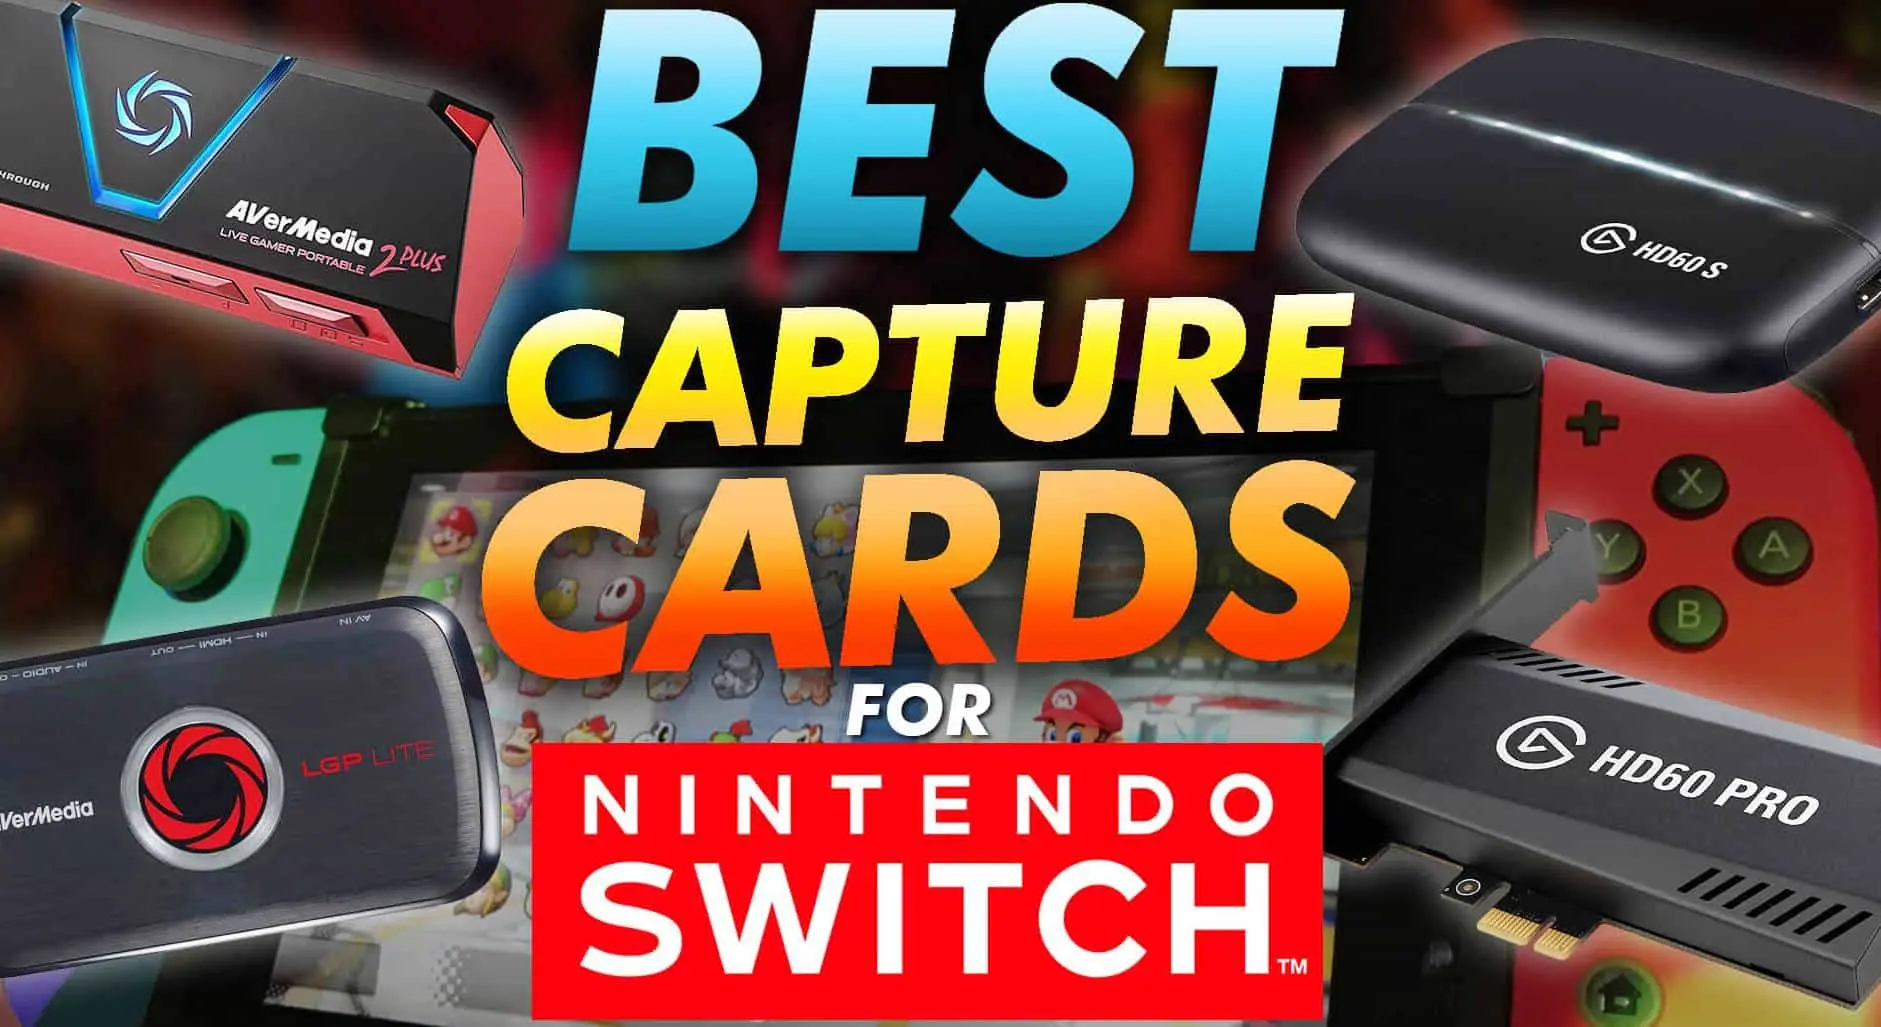 Get Best Capture Cards for your Nintendo Switch!